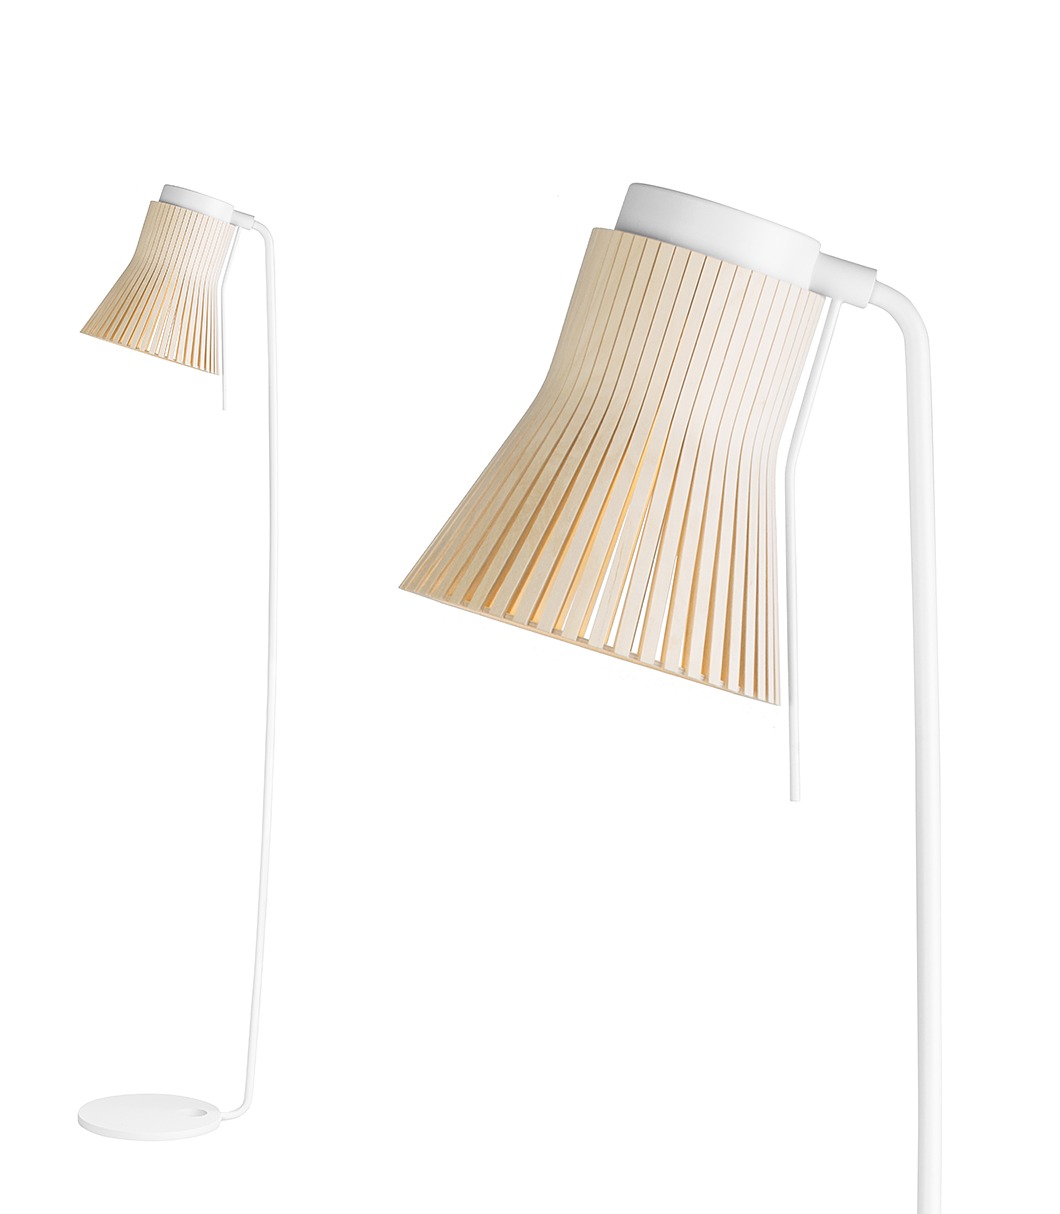 Petite 4610 floor lamp is available in natural birch